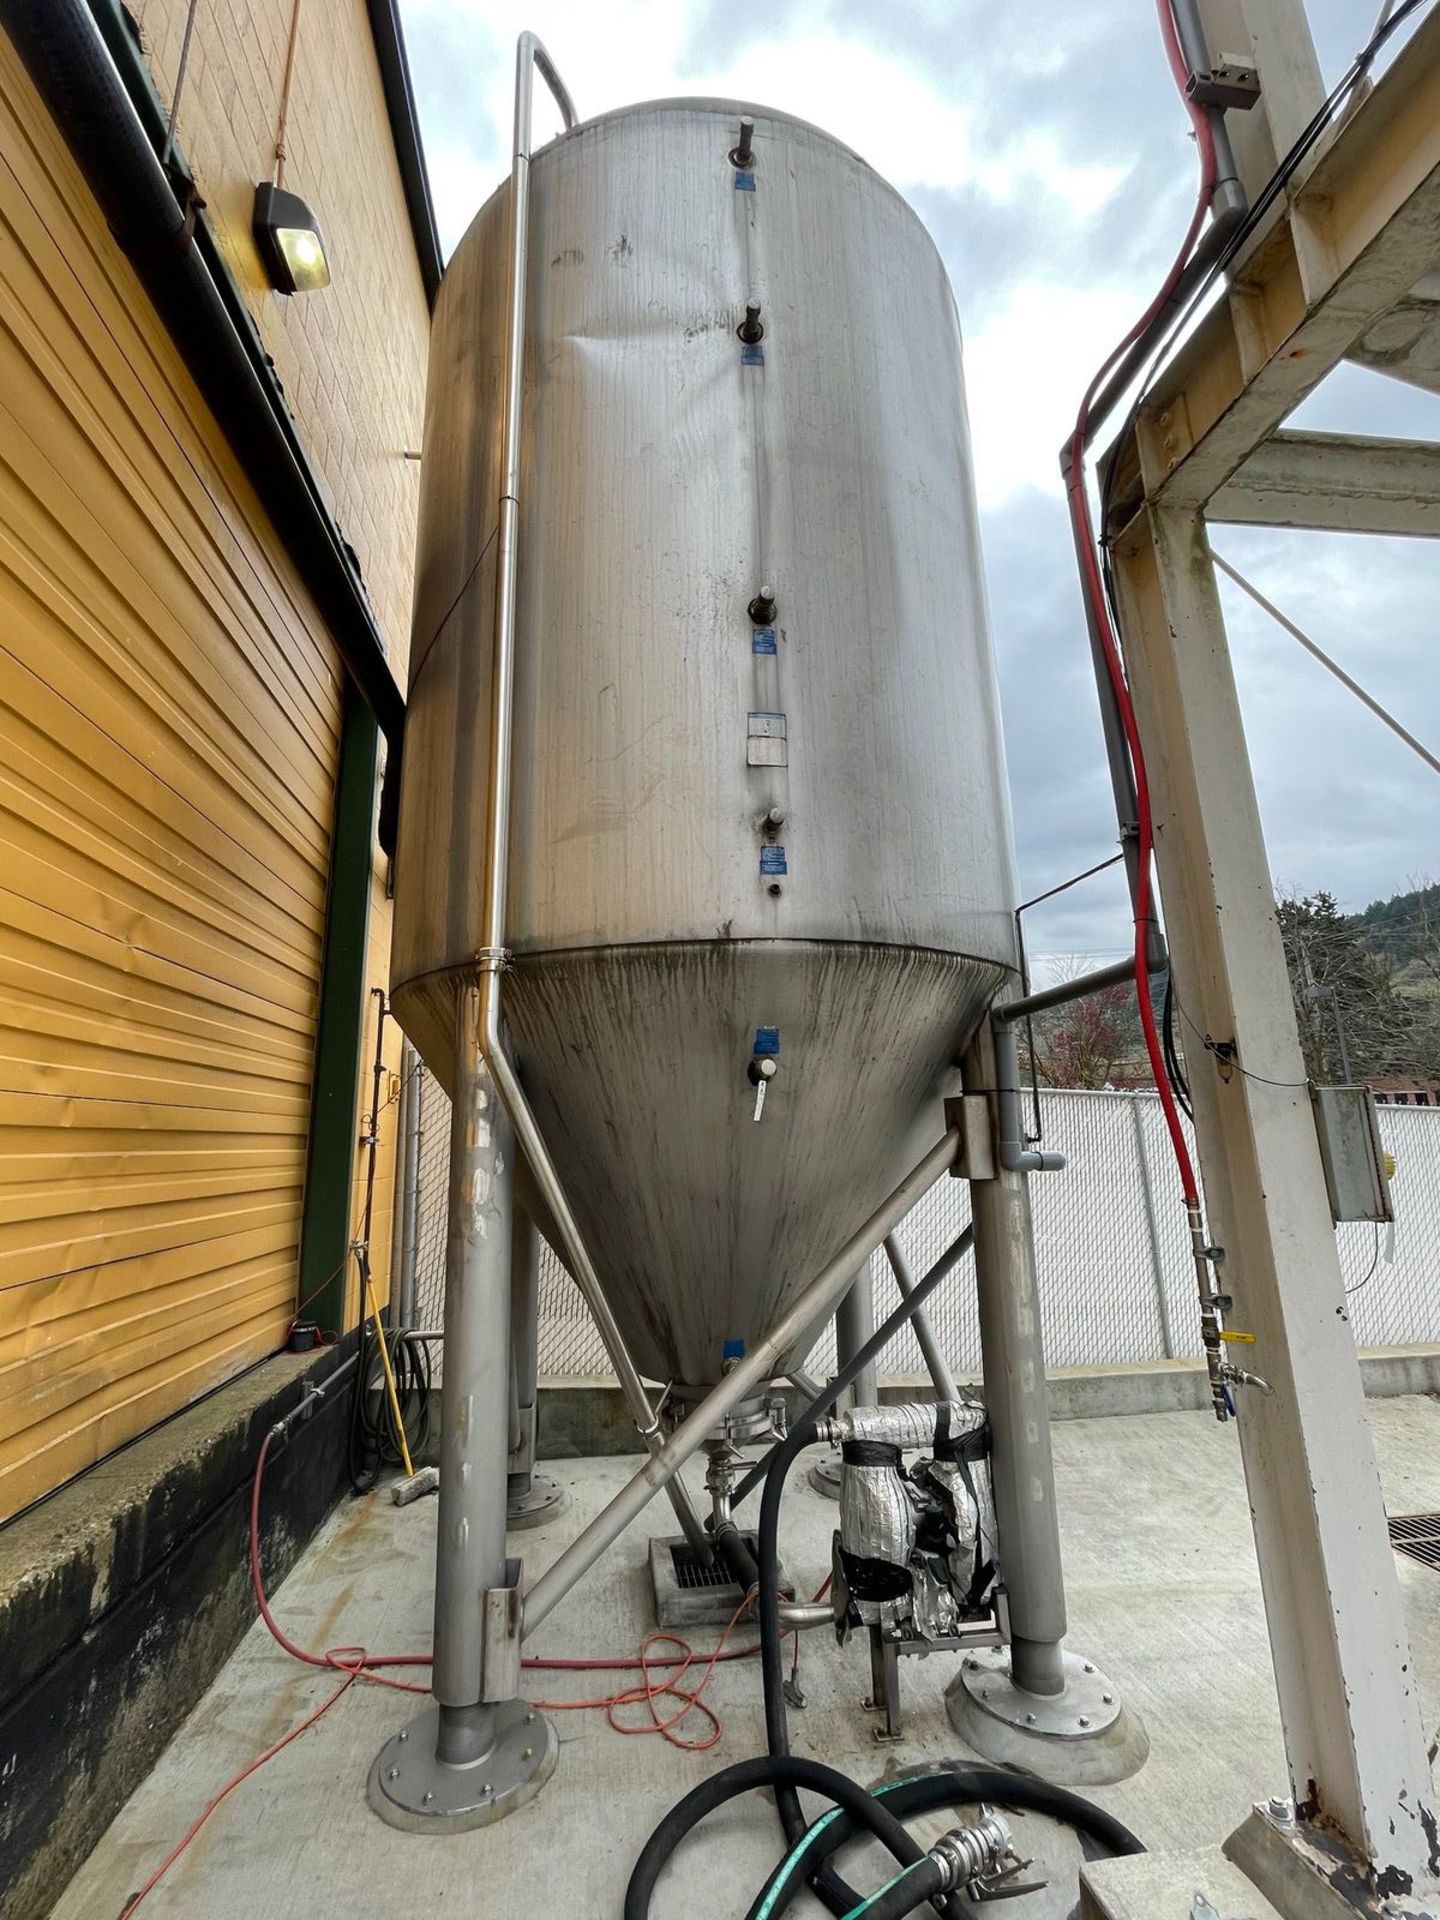 MUELLER 240 BBL SPENT YEAST TANK WITH 26 PSI RATING (7500 GALLON JACKETED TANK), | Rig Fee: 3000 - Image 2 of 5